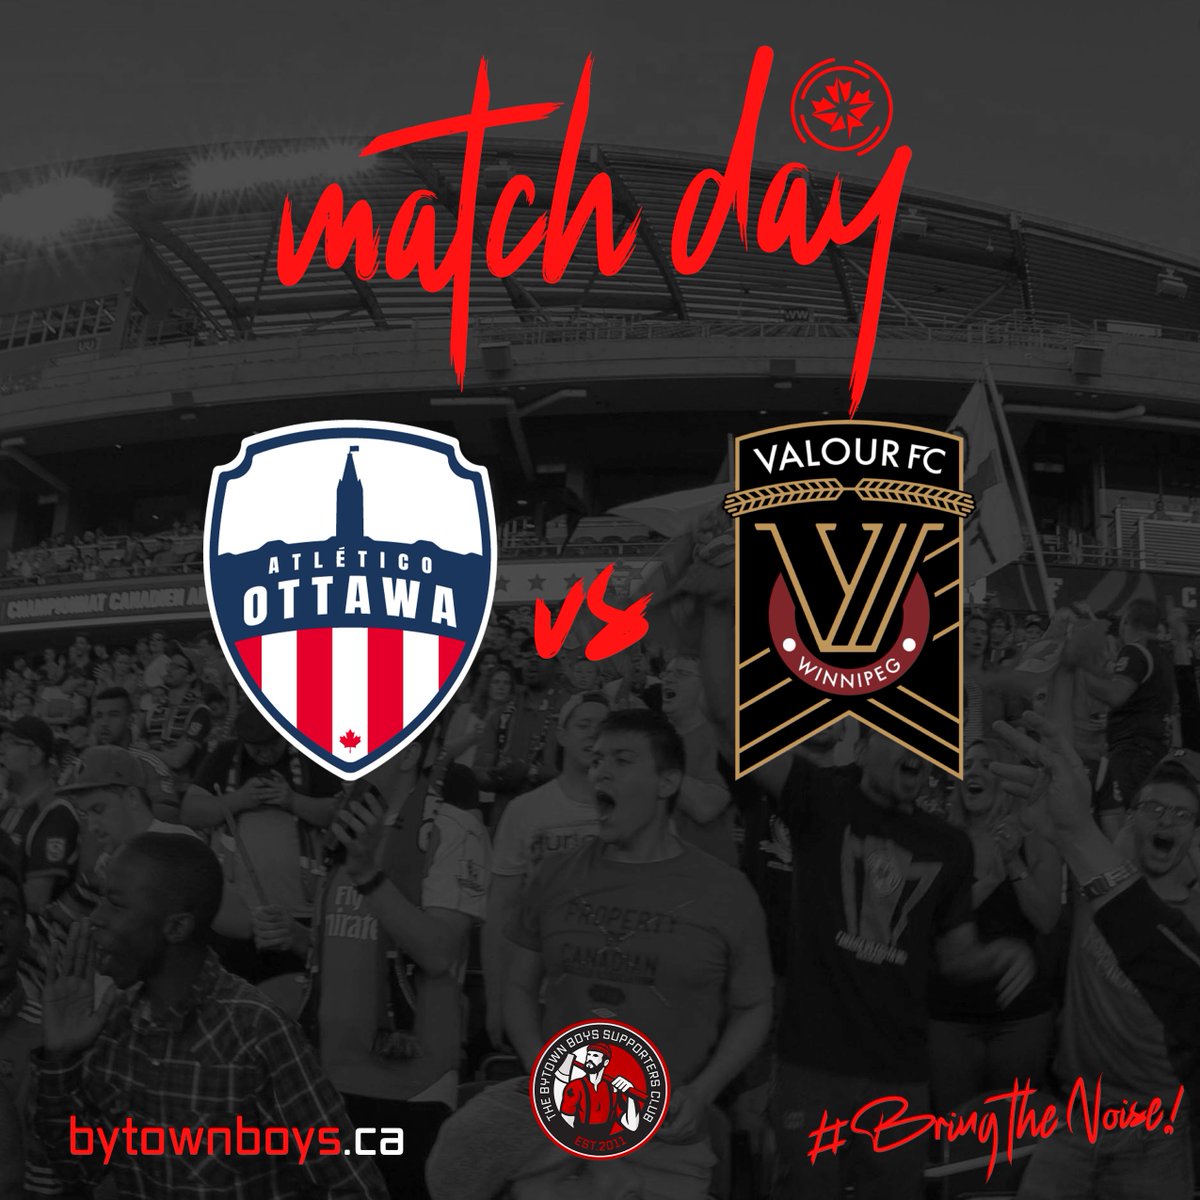 We won last Saturday
We won on Wednesday, that's two in a row.
We win today, its called a winning streak. It has happened before

#SupportLocalFootball #BringTheNoise #AllezOttawa #ForOttawa #VamosOttawa